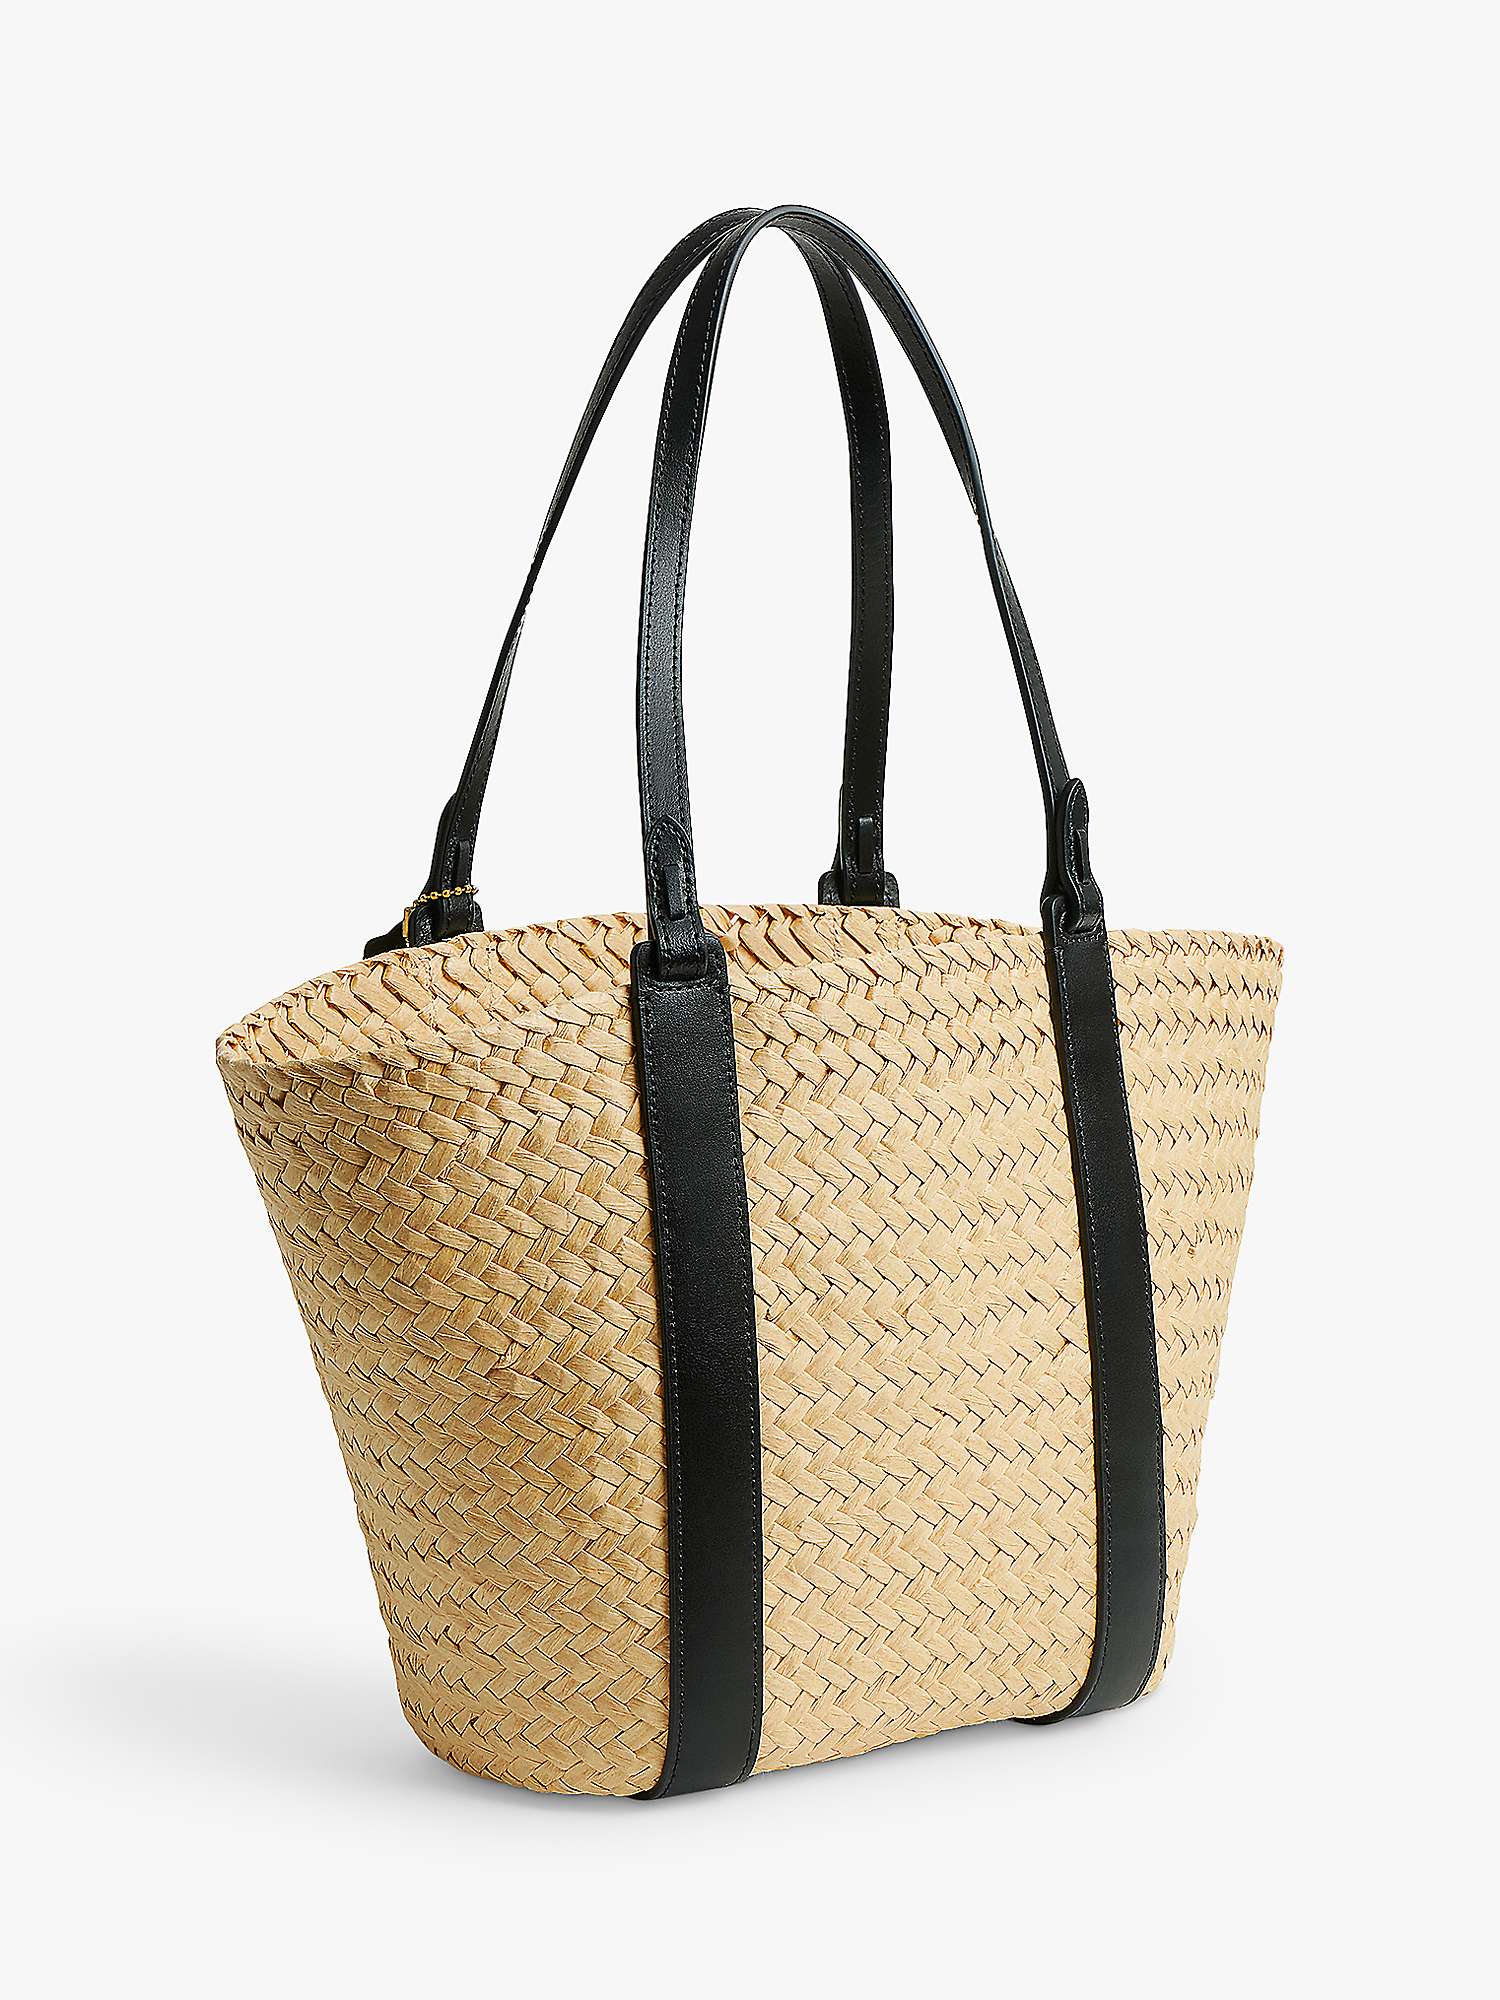 Buy Coach Small Straw Leather Trim Tote Bag, Natural Online at johnlewis.com